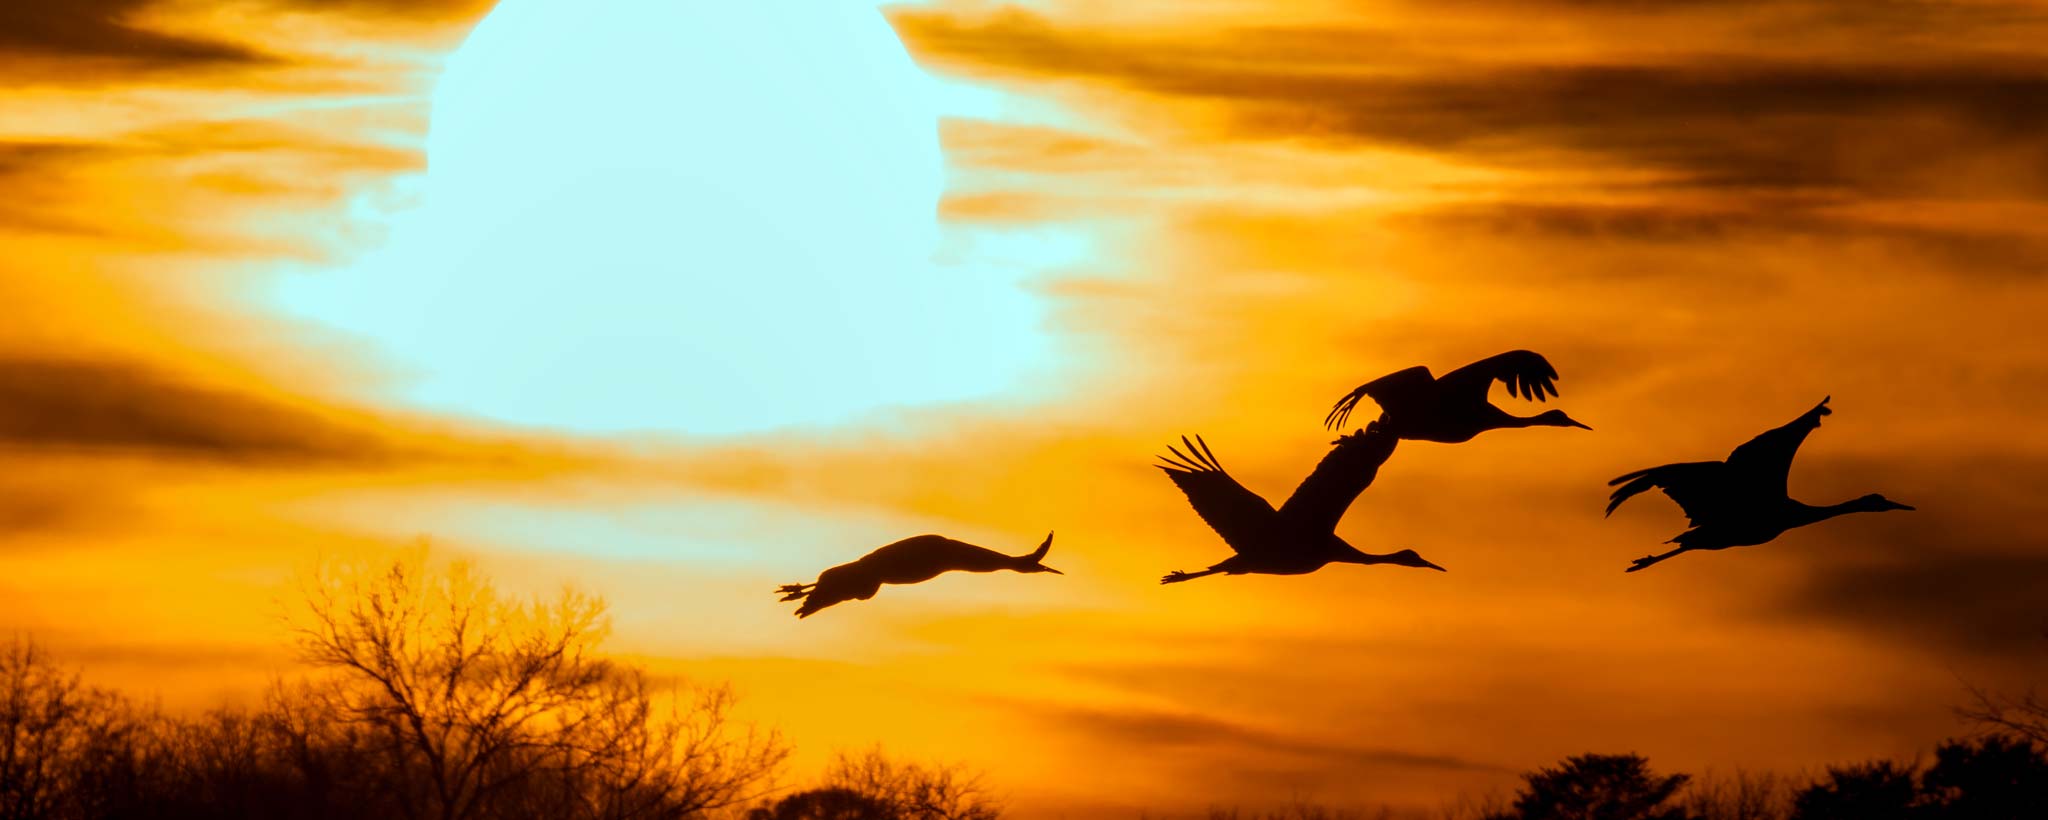 Four sandhill cranes fly low over the landscape as the sun sets on the horizon